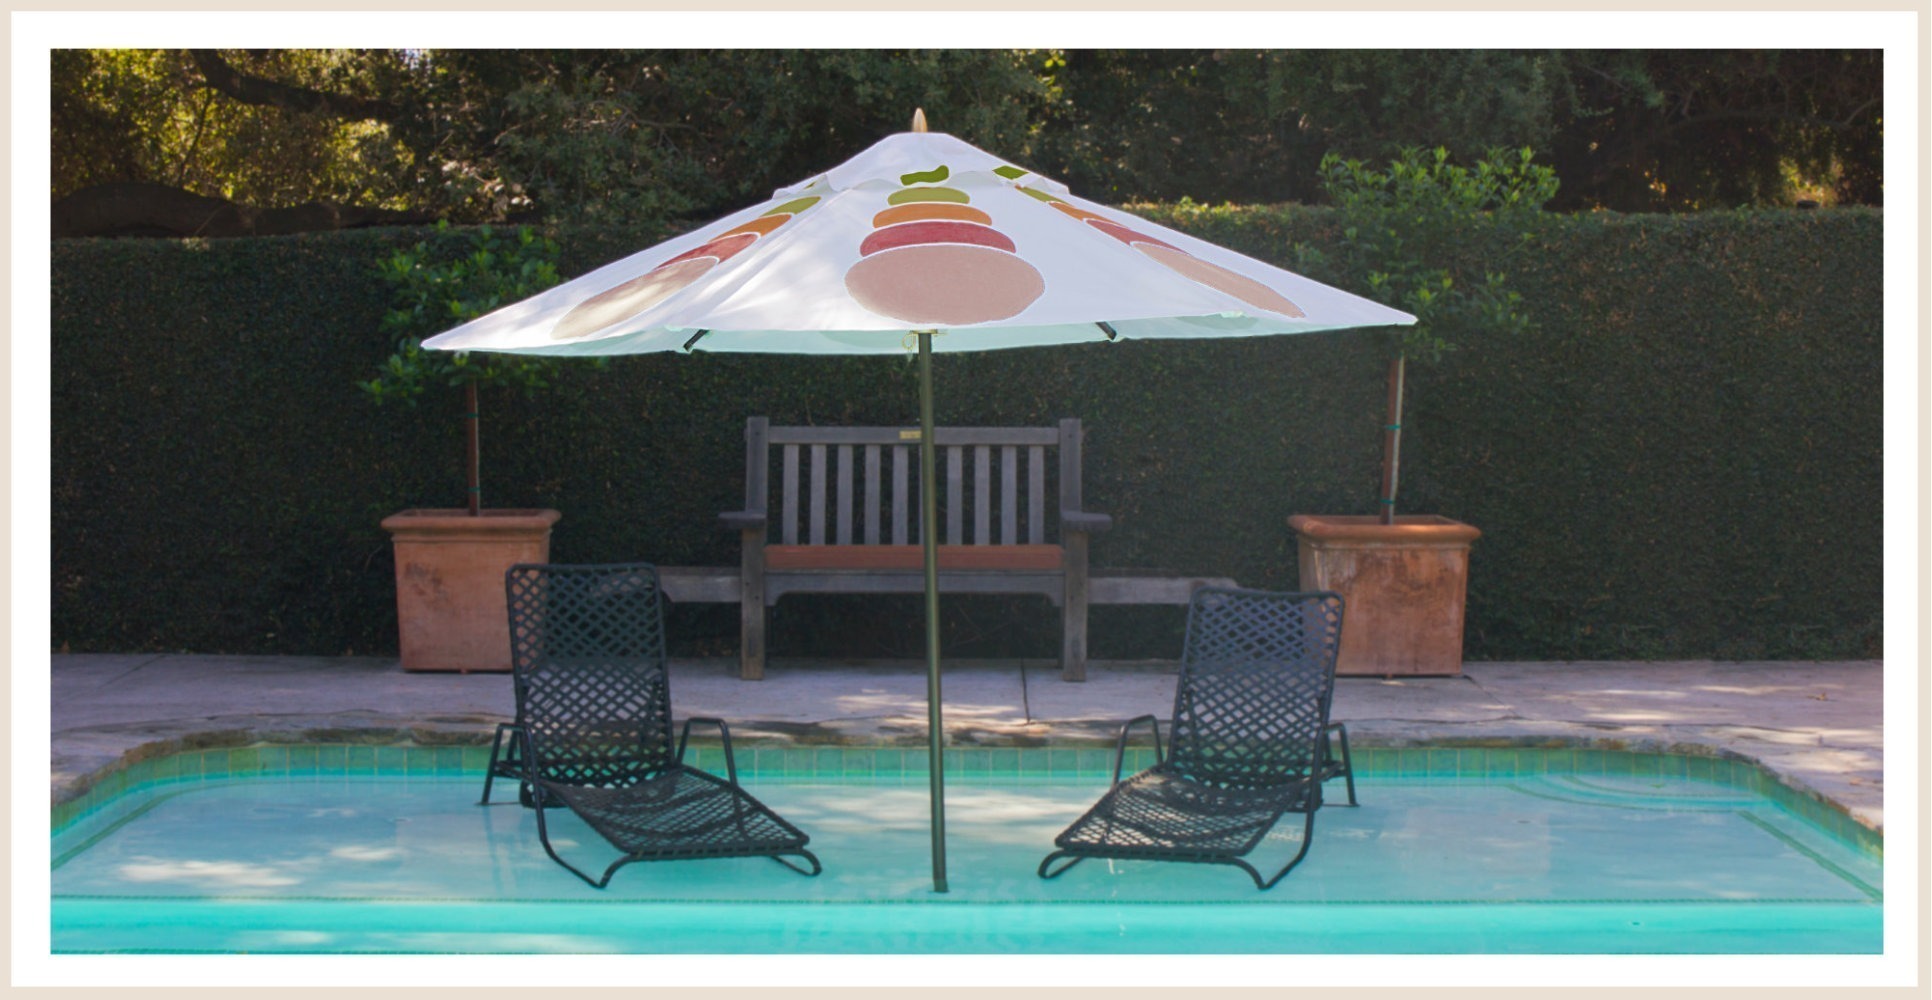 unique patio umbrella by the pool, painted by pearl and maude perfect for outdoor entertaining, pool parties and summer fun in the garden, fun garden furniture